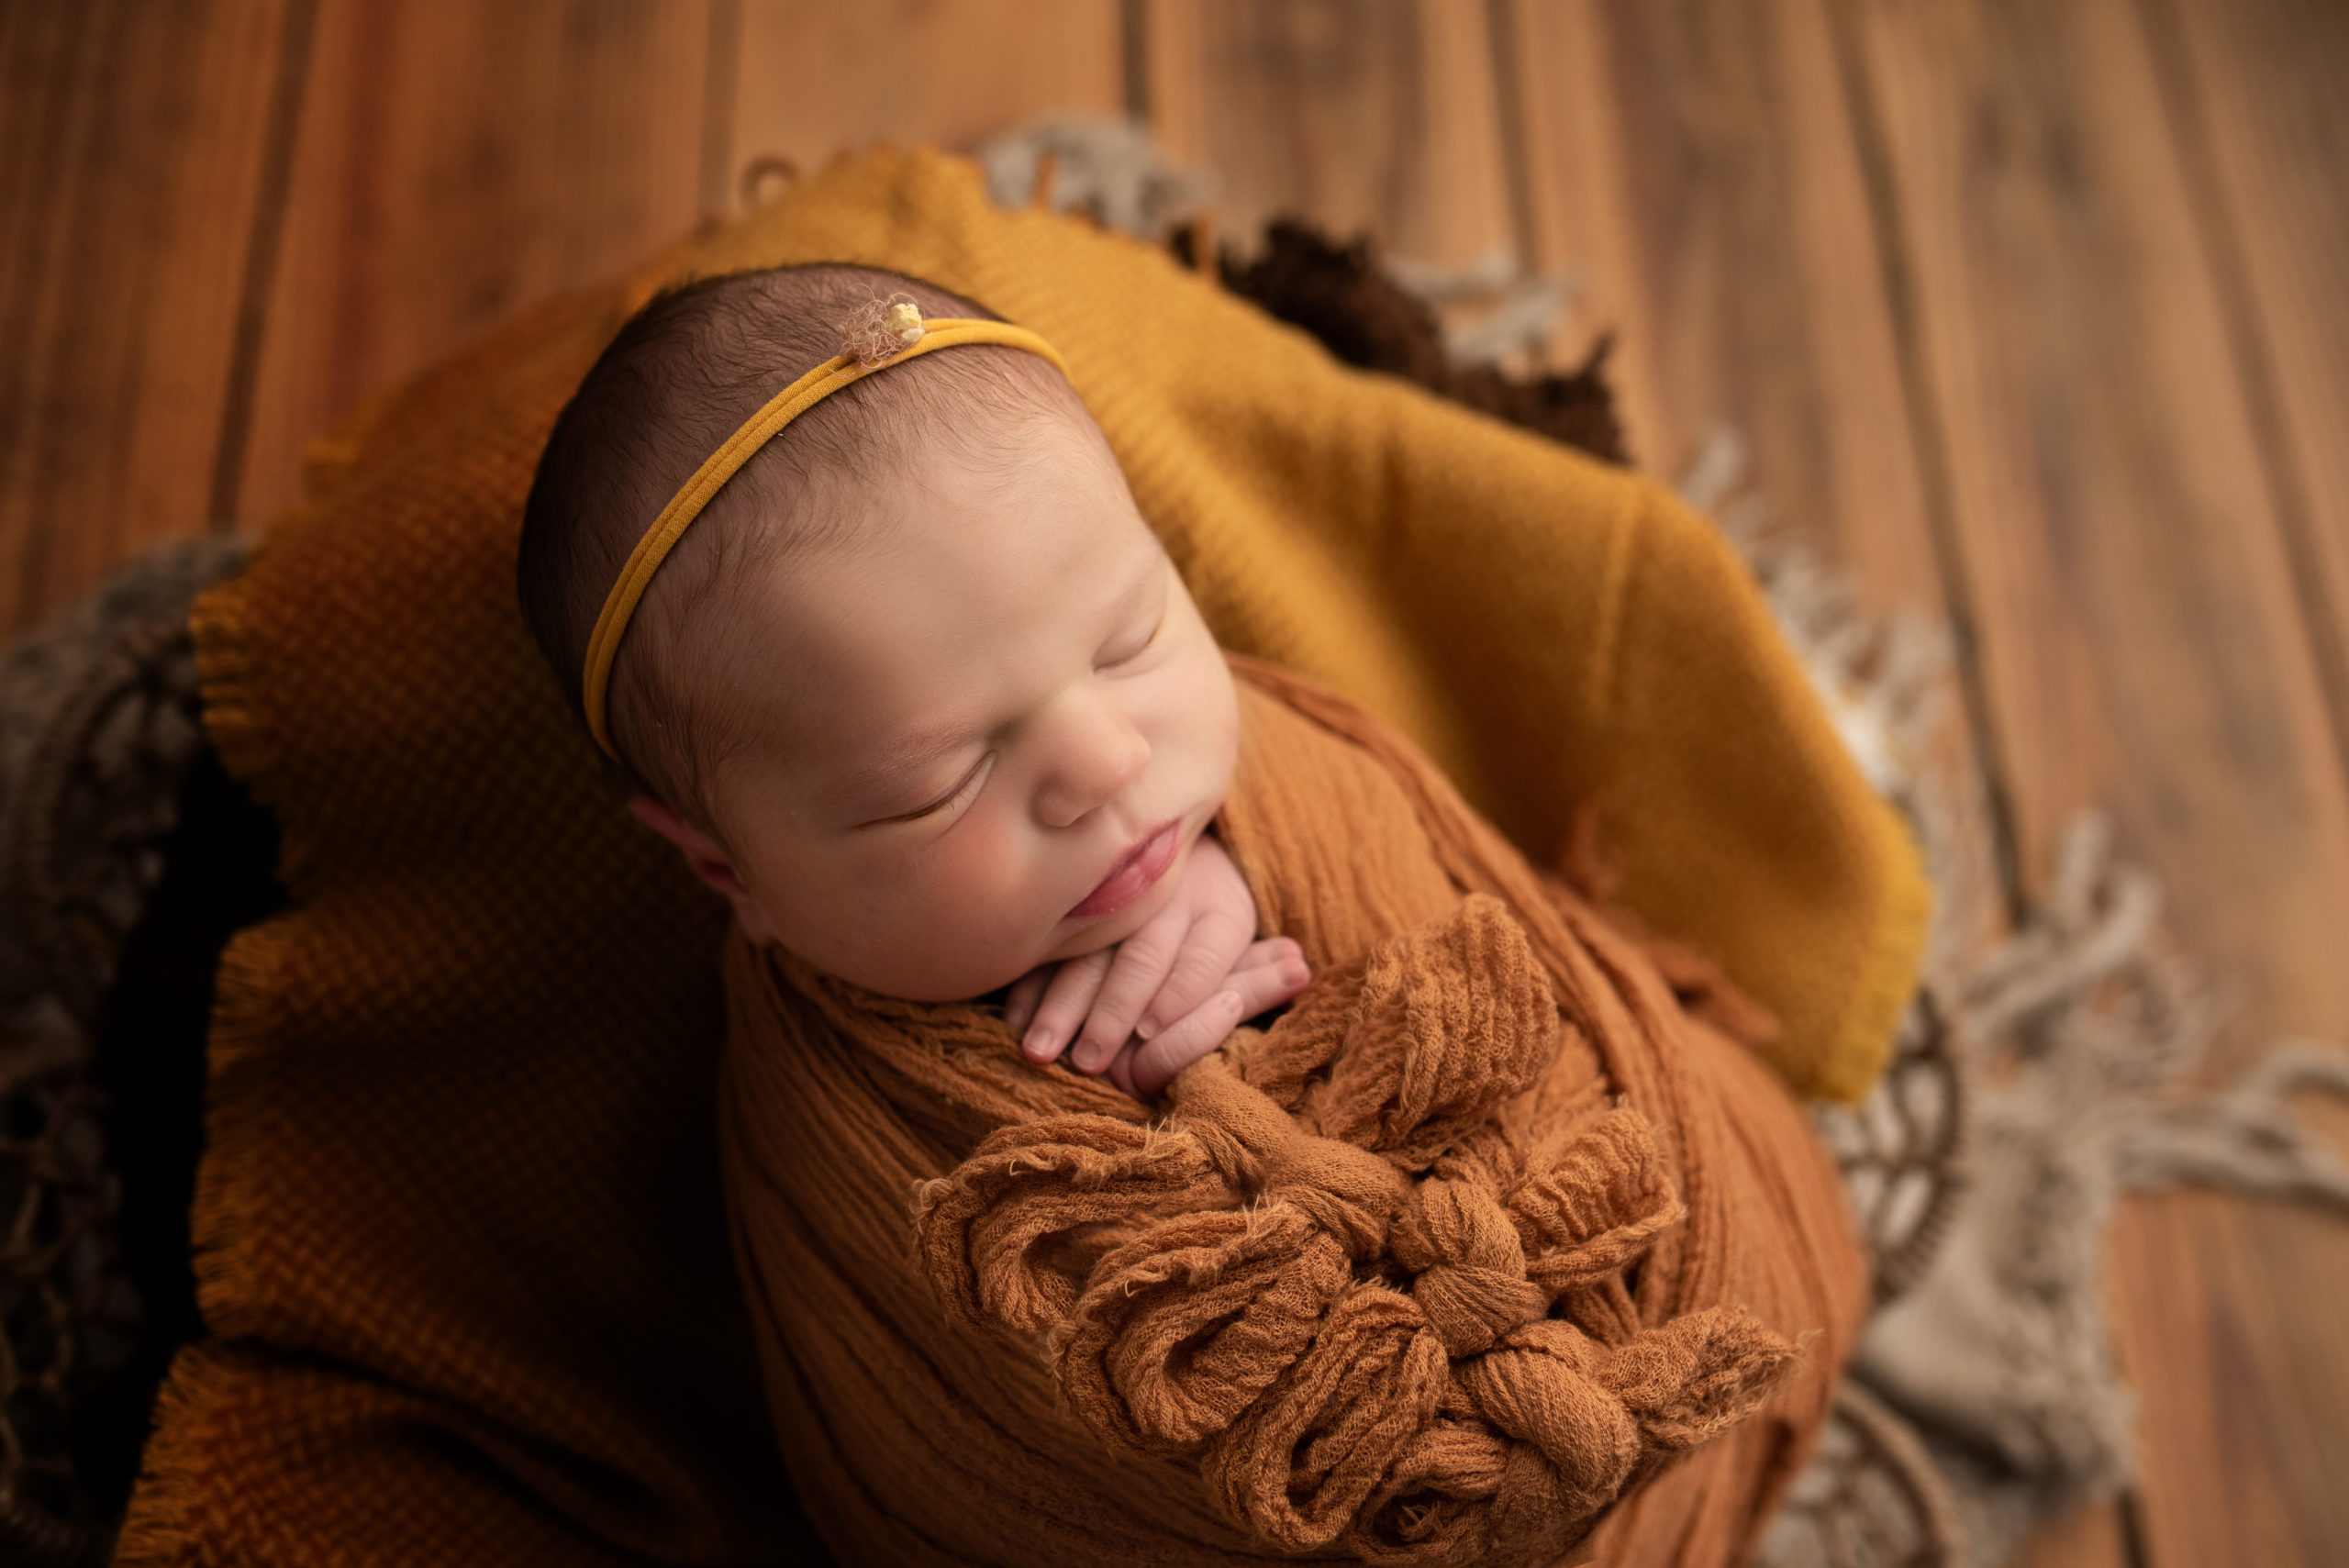 newborn wrapped in swaddle during newborn photo session